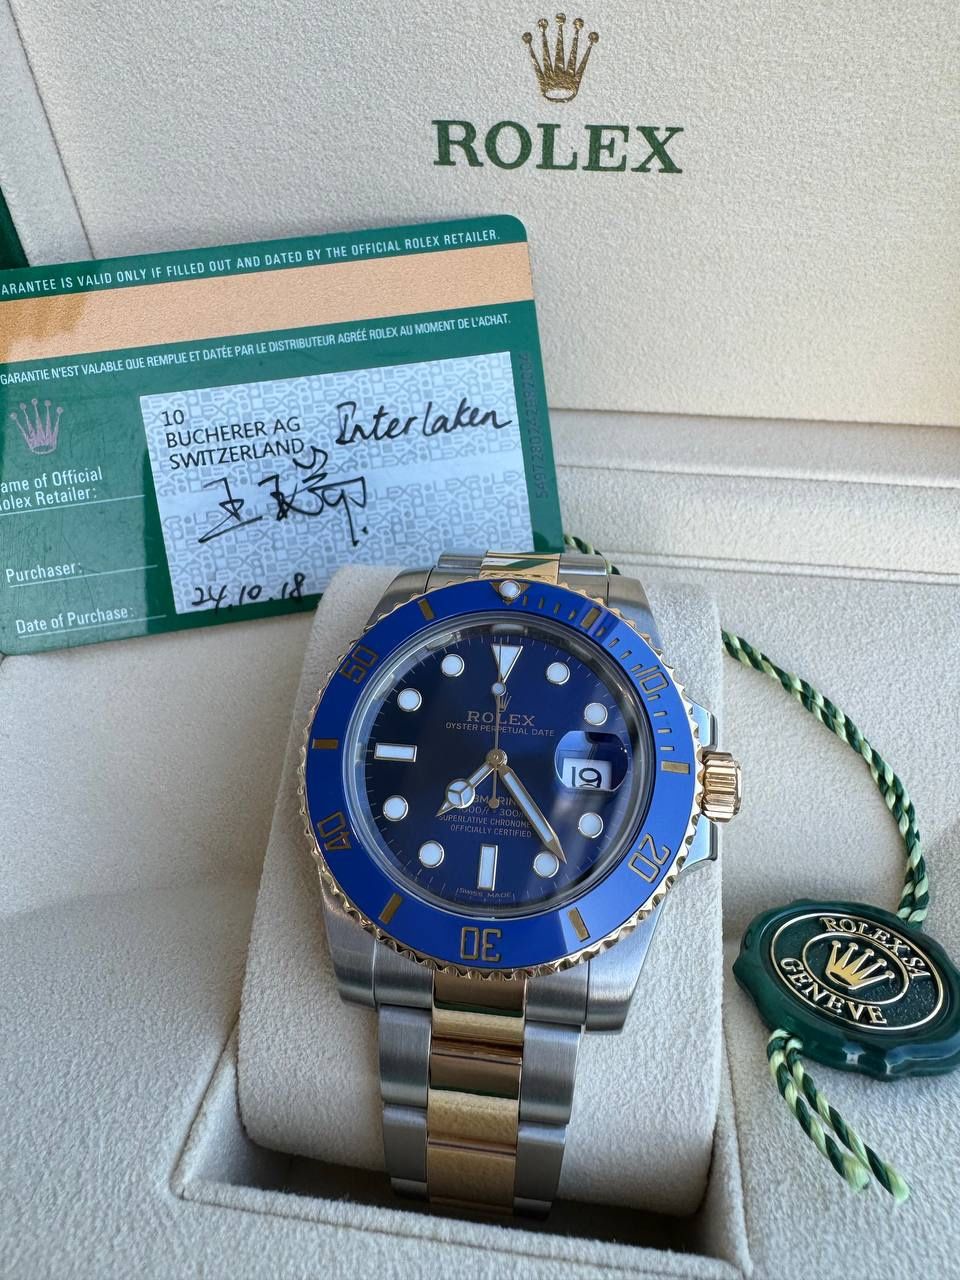 Rolex Submariner Date 40mm Blue dial 18k yellow gold and stainless steel full set box and card 116613LB Bluessy 2018